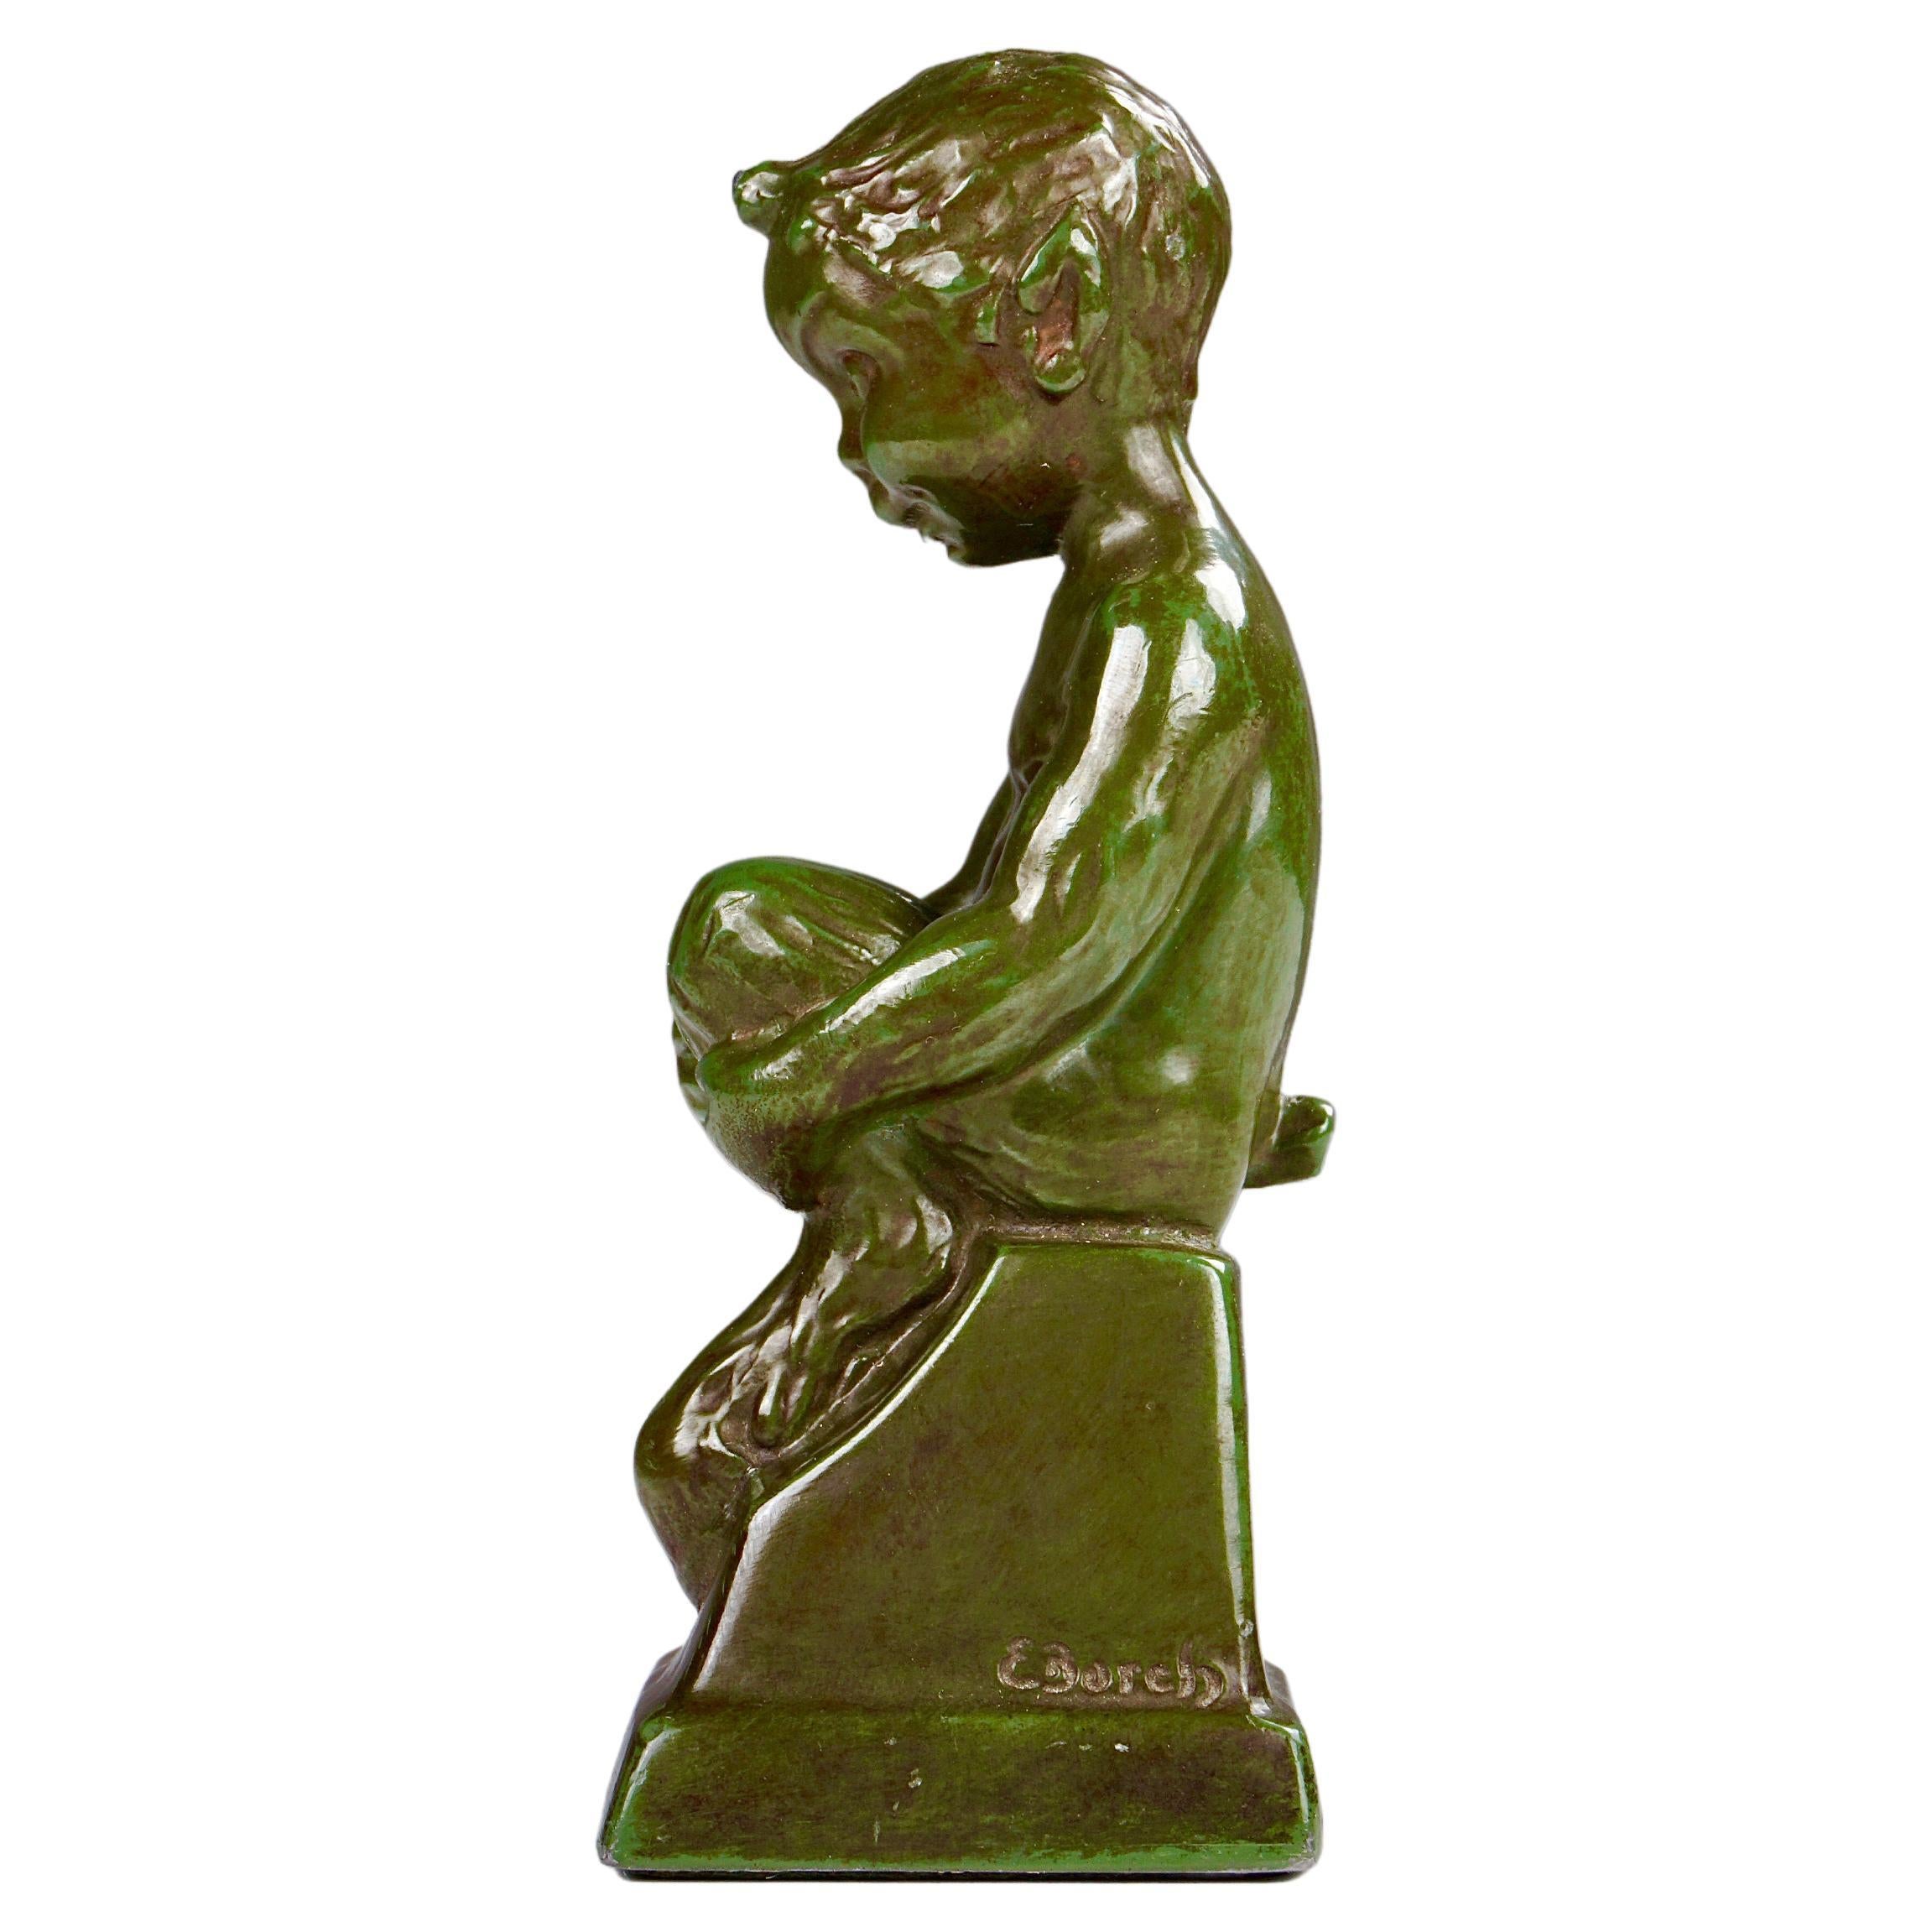 1940's Sitting Faun by Elena Borch Produced in Disco Metal by Just Andersen A/S